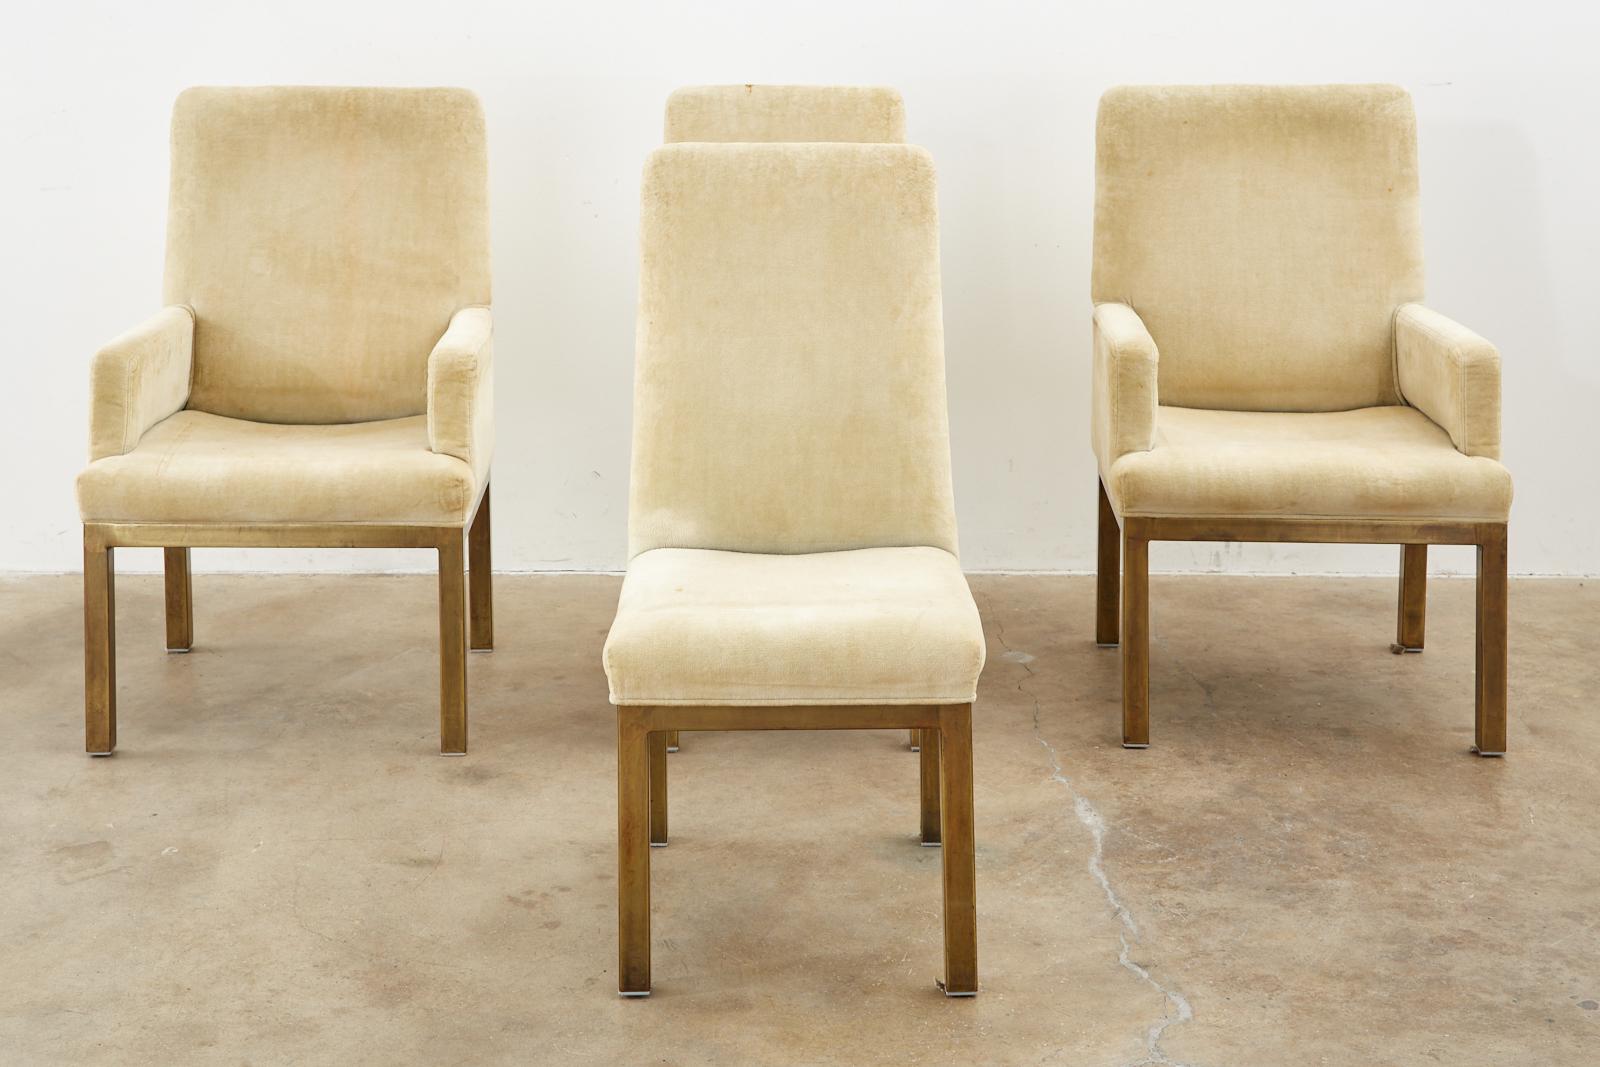 Spanish Set of Four Midcentury Bronzed Dining Chairs by Mastercraft